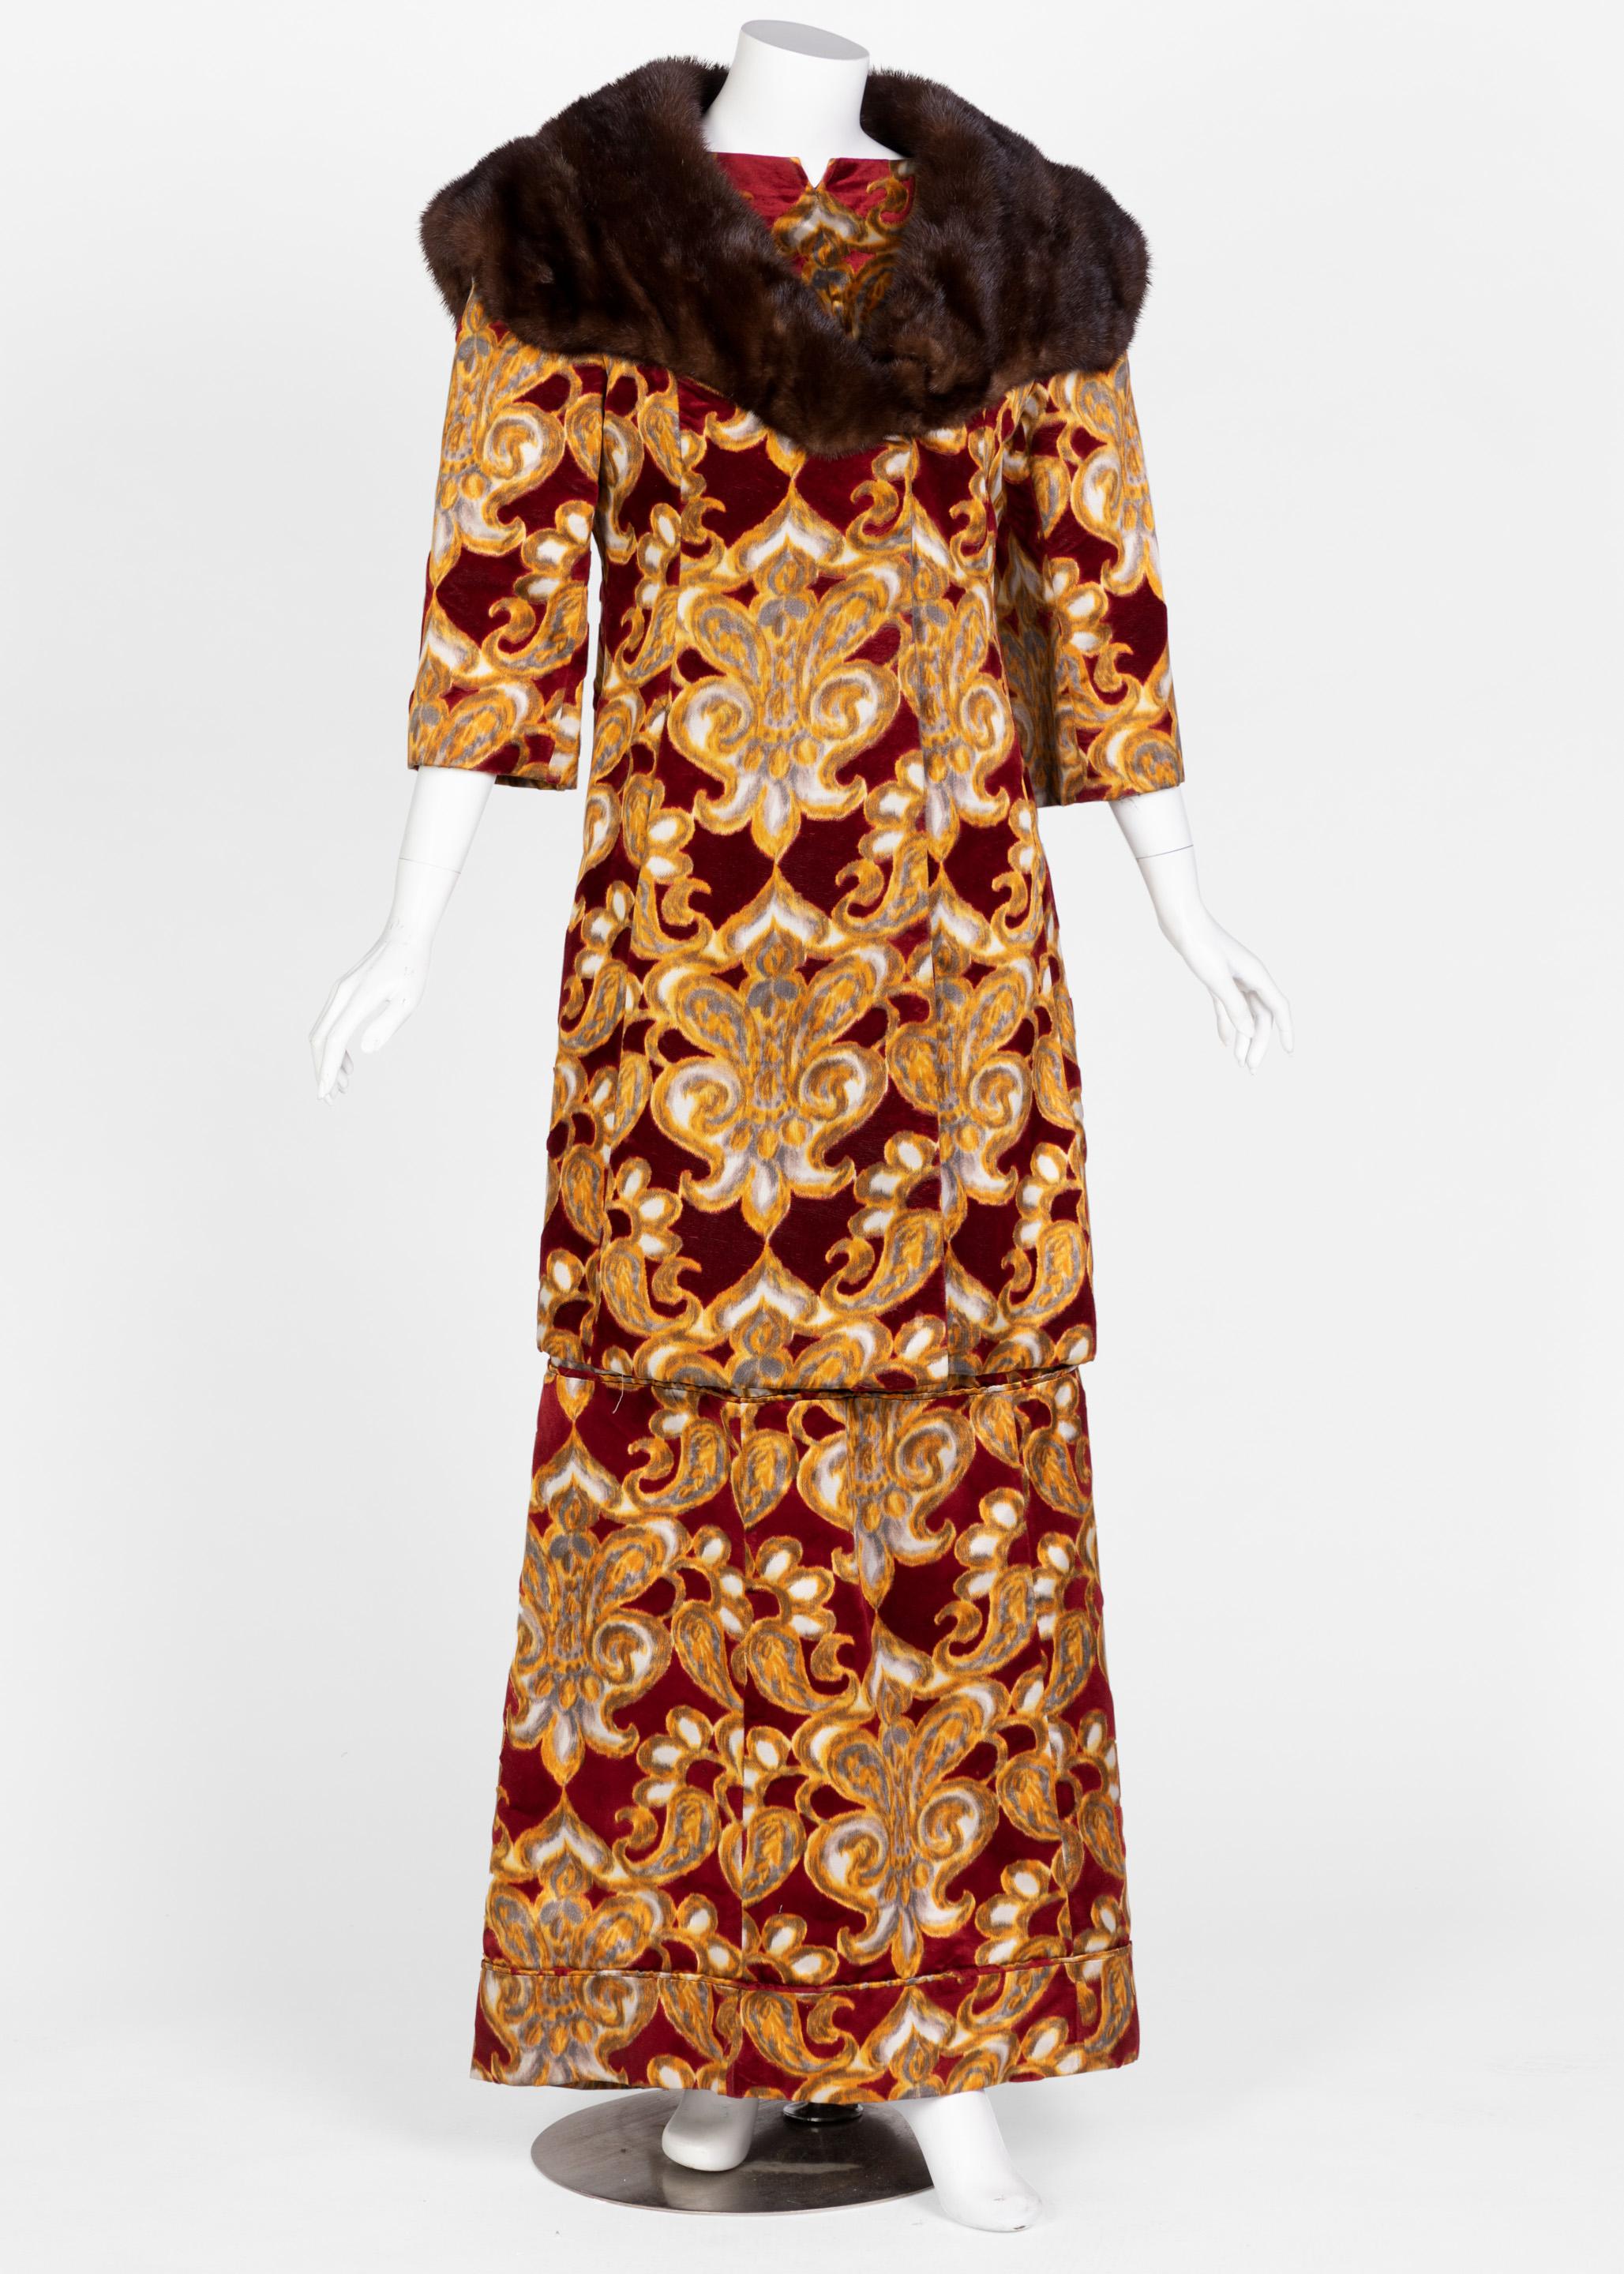 Garments by James Galanos were explicitly designed to capture an audience. Having designed for some of the most prominent women of his time, Galanos often incorporated rich colors, glamorous sparkles, and of course, sumptuous furs to take his looks